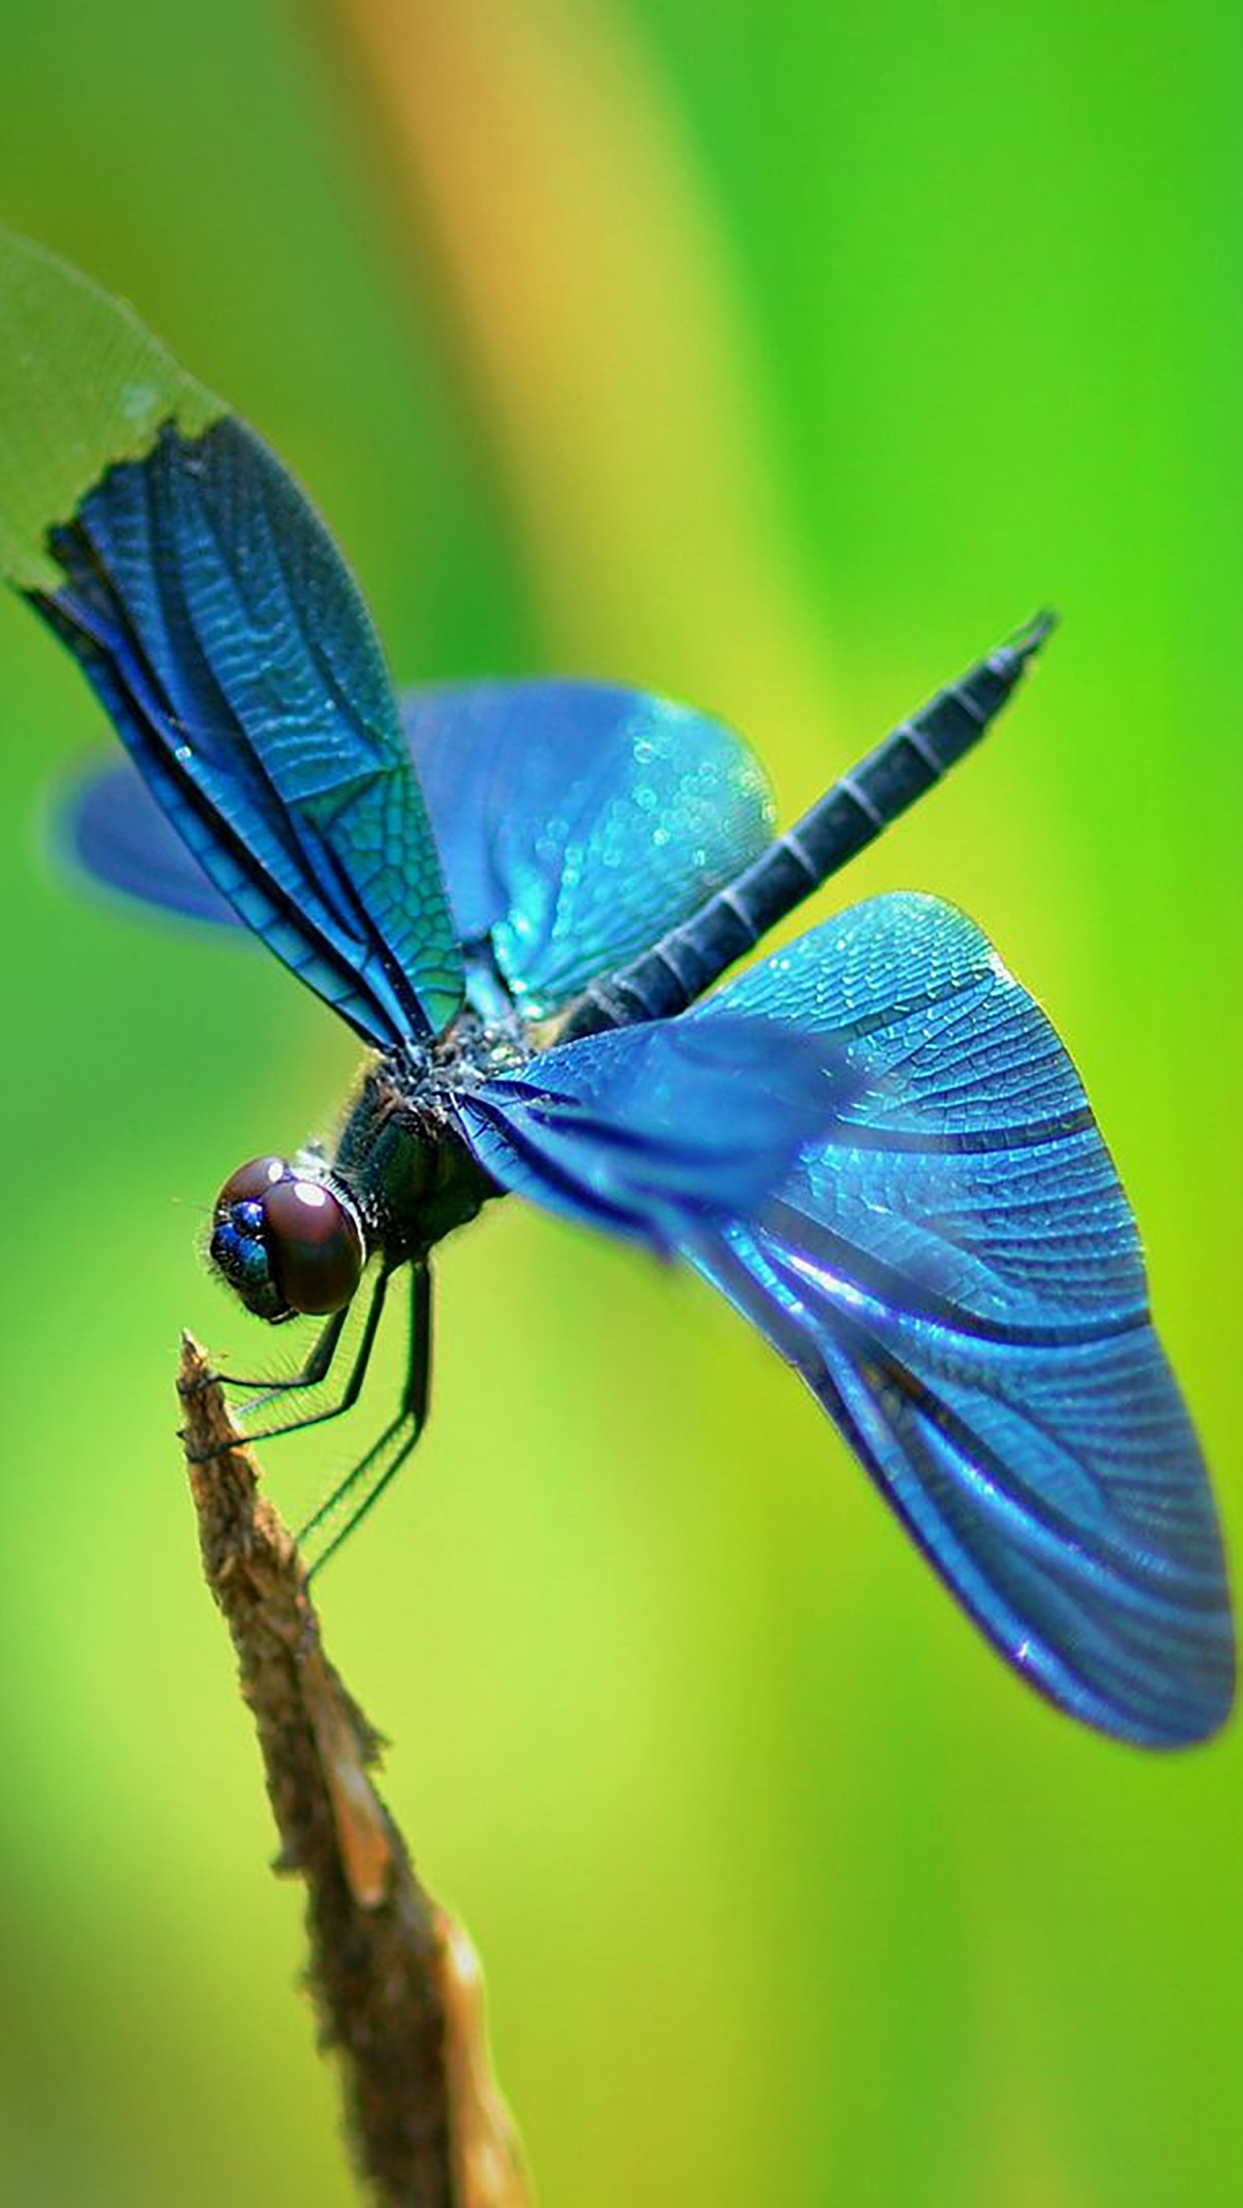 Insect Dragonfly Wallpaper For iPhone Pro Max X